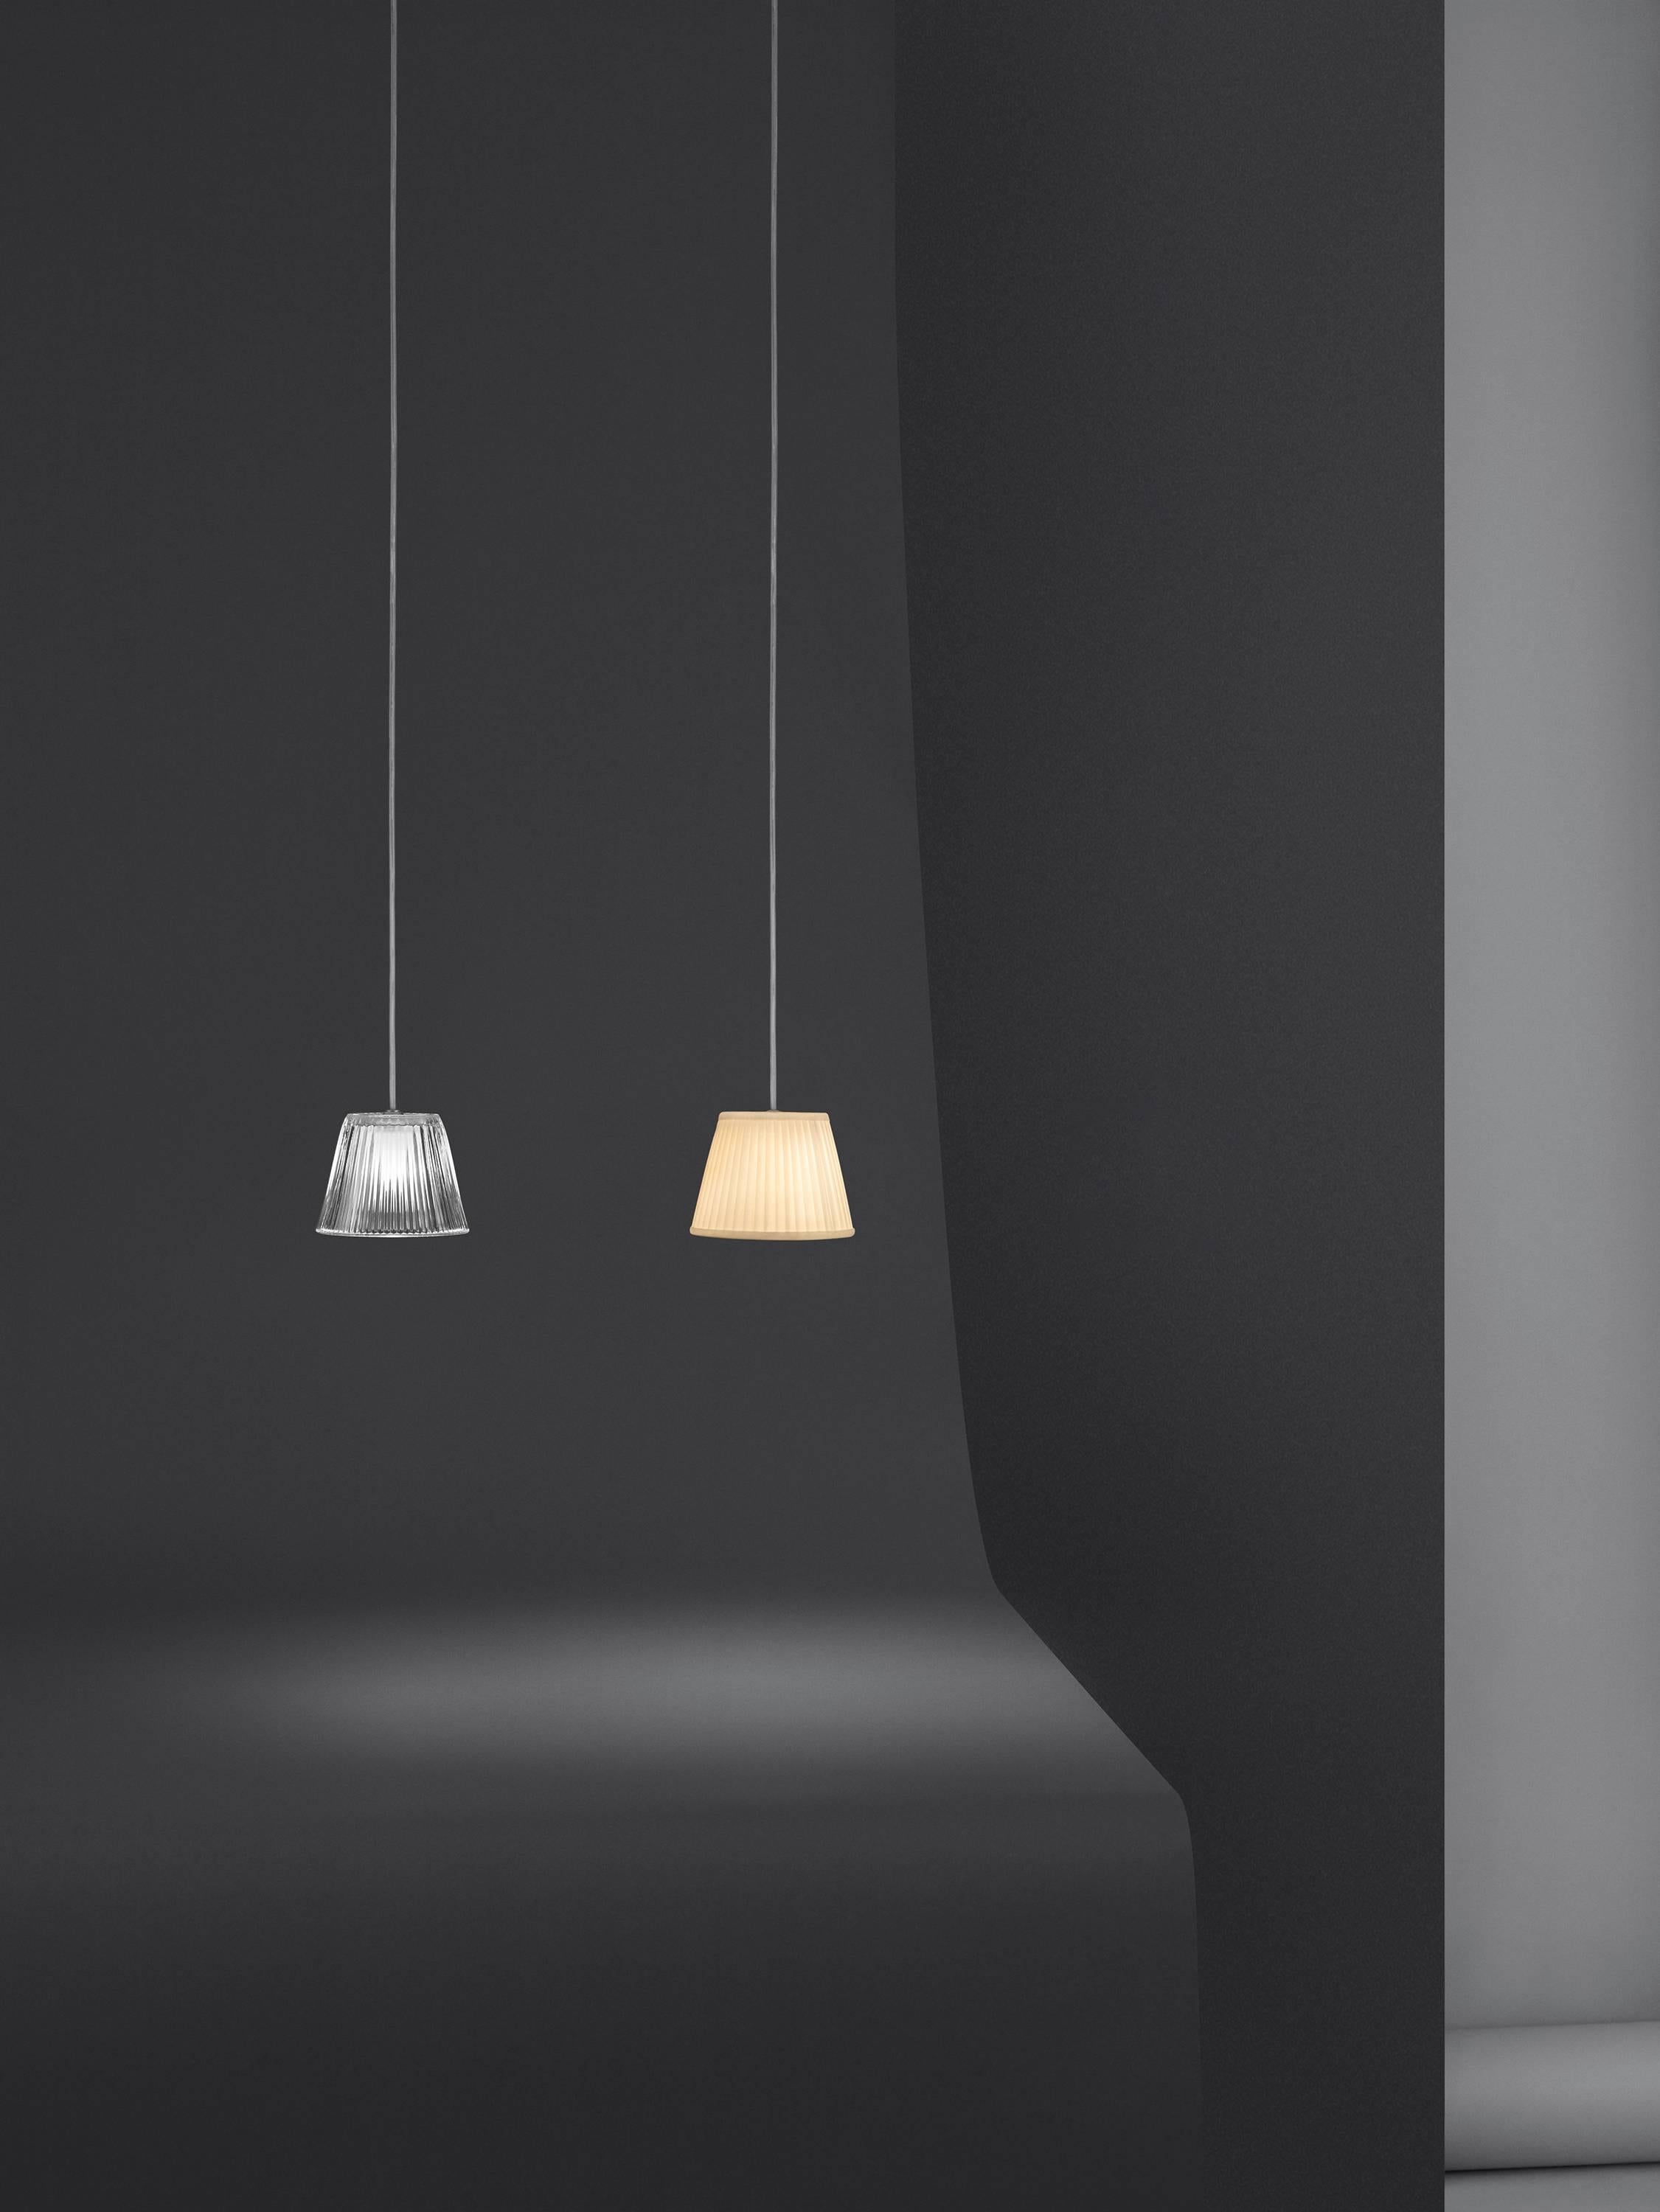 Part of the Romeo family created by industry innovator Philipe Starck, this stunning and strikingly simple pendant light provides diffused light through a plissé cloth shade and acid-etched pressed borosilicate glass internal diffuser. There is an